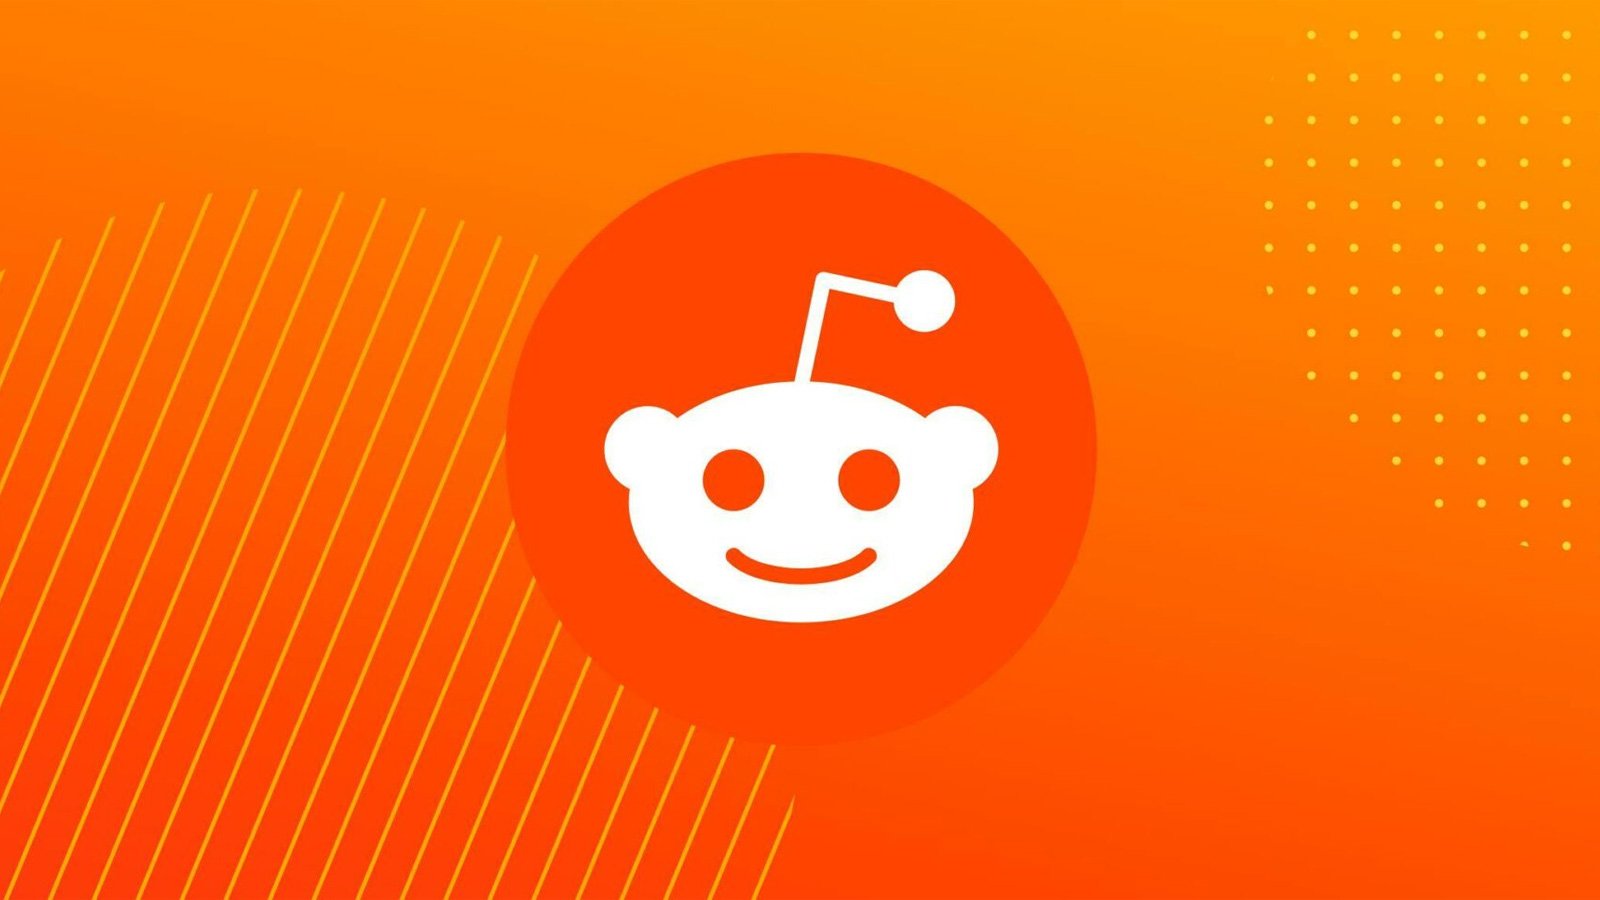 Reddit Suffers Major Outage Due to Internal Systems Issue